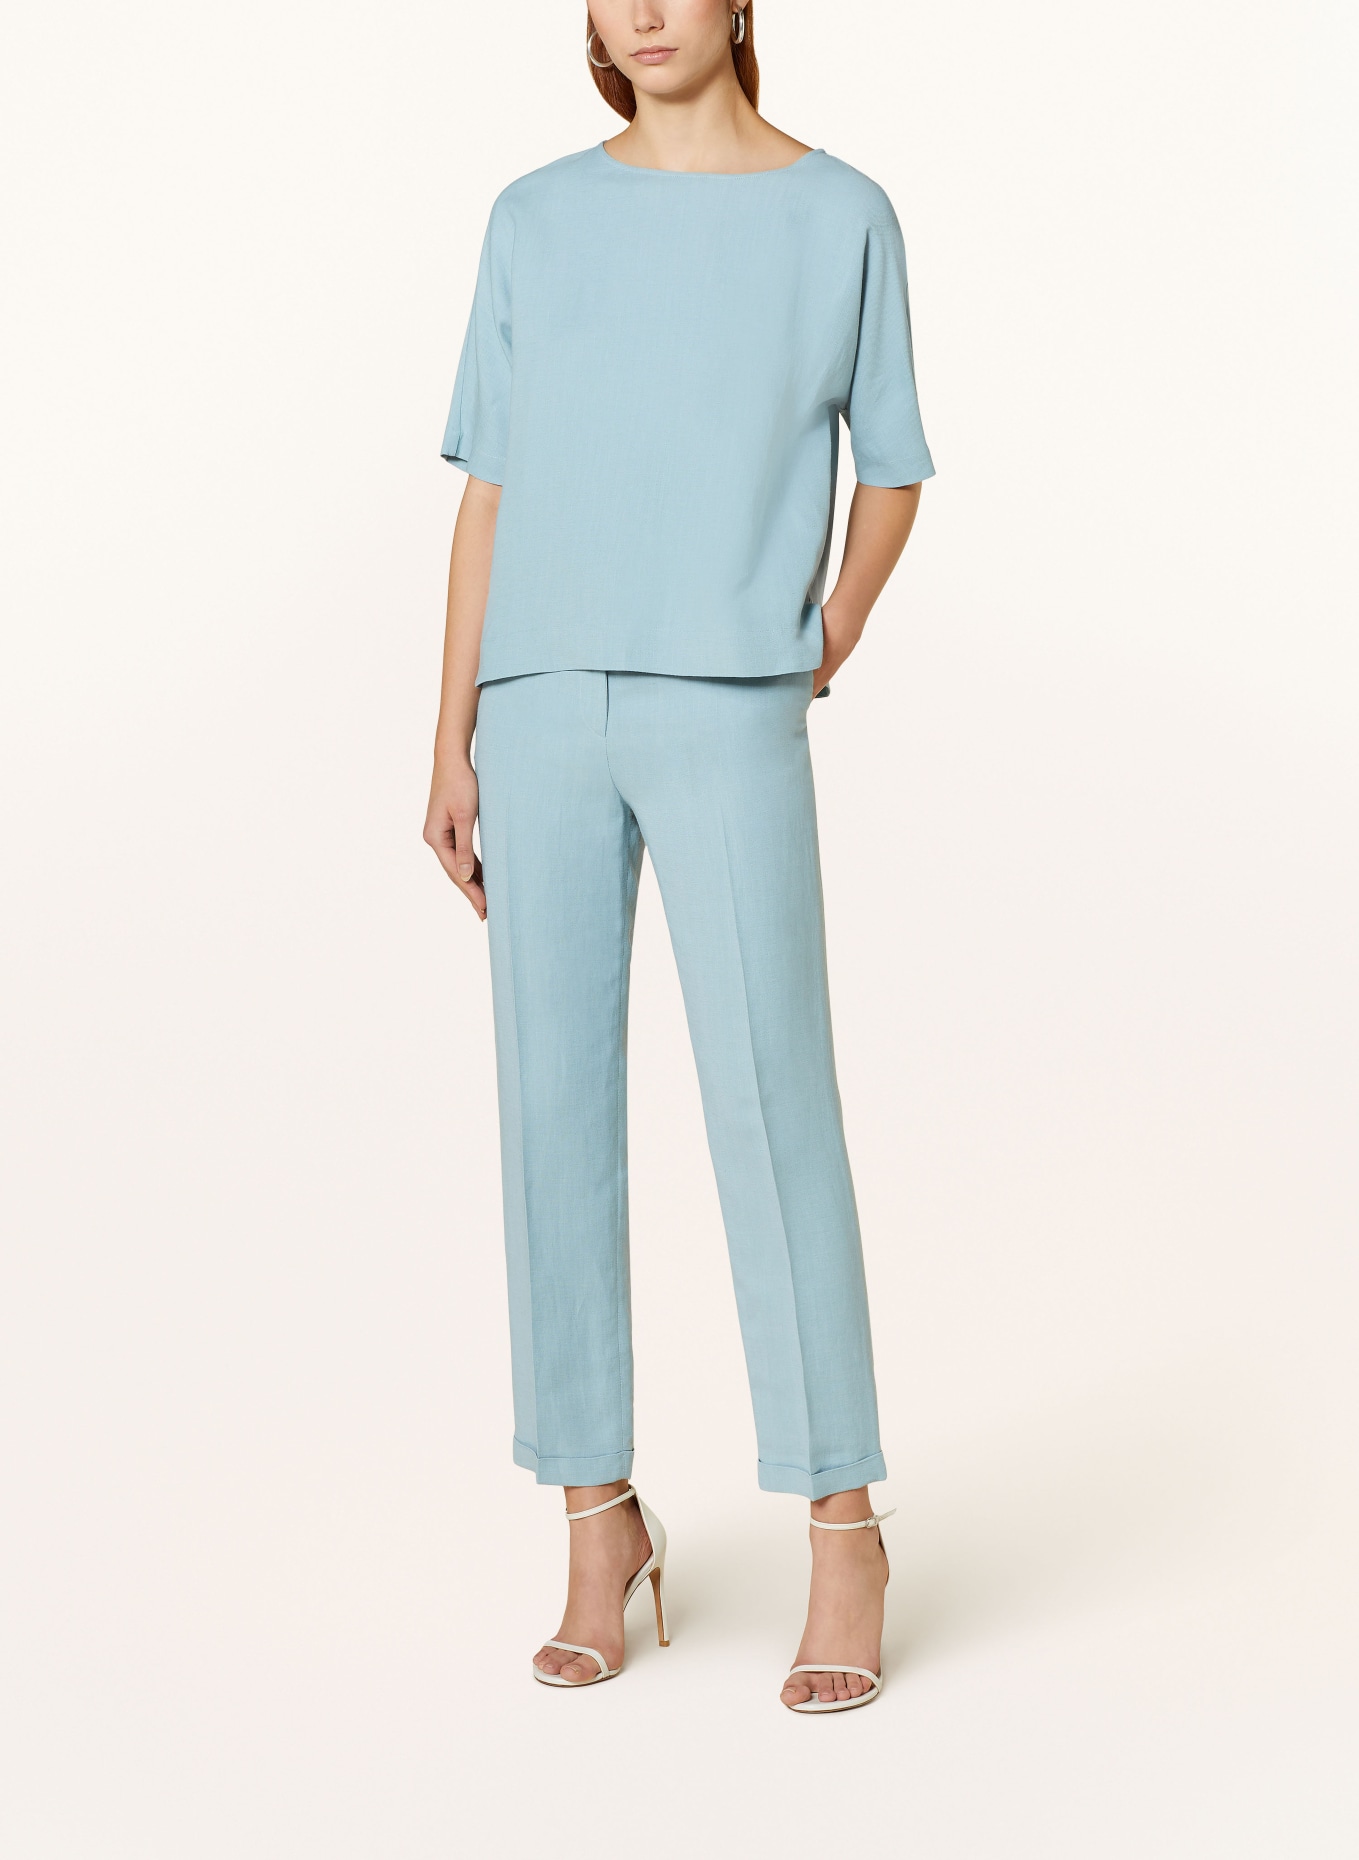 ANTONELLI firenze Shirt blouse DANIEL with 3/4 sleeves, Color: LIGHT BLUE (Image 2)